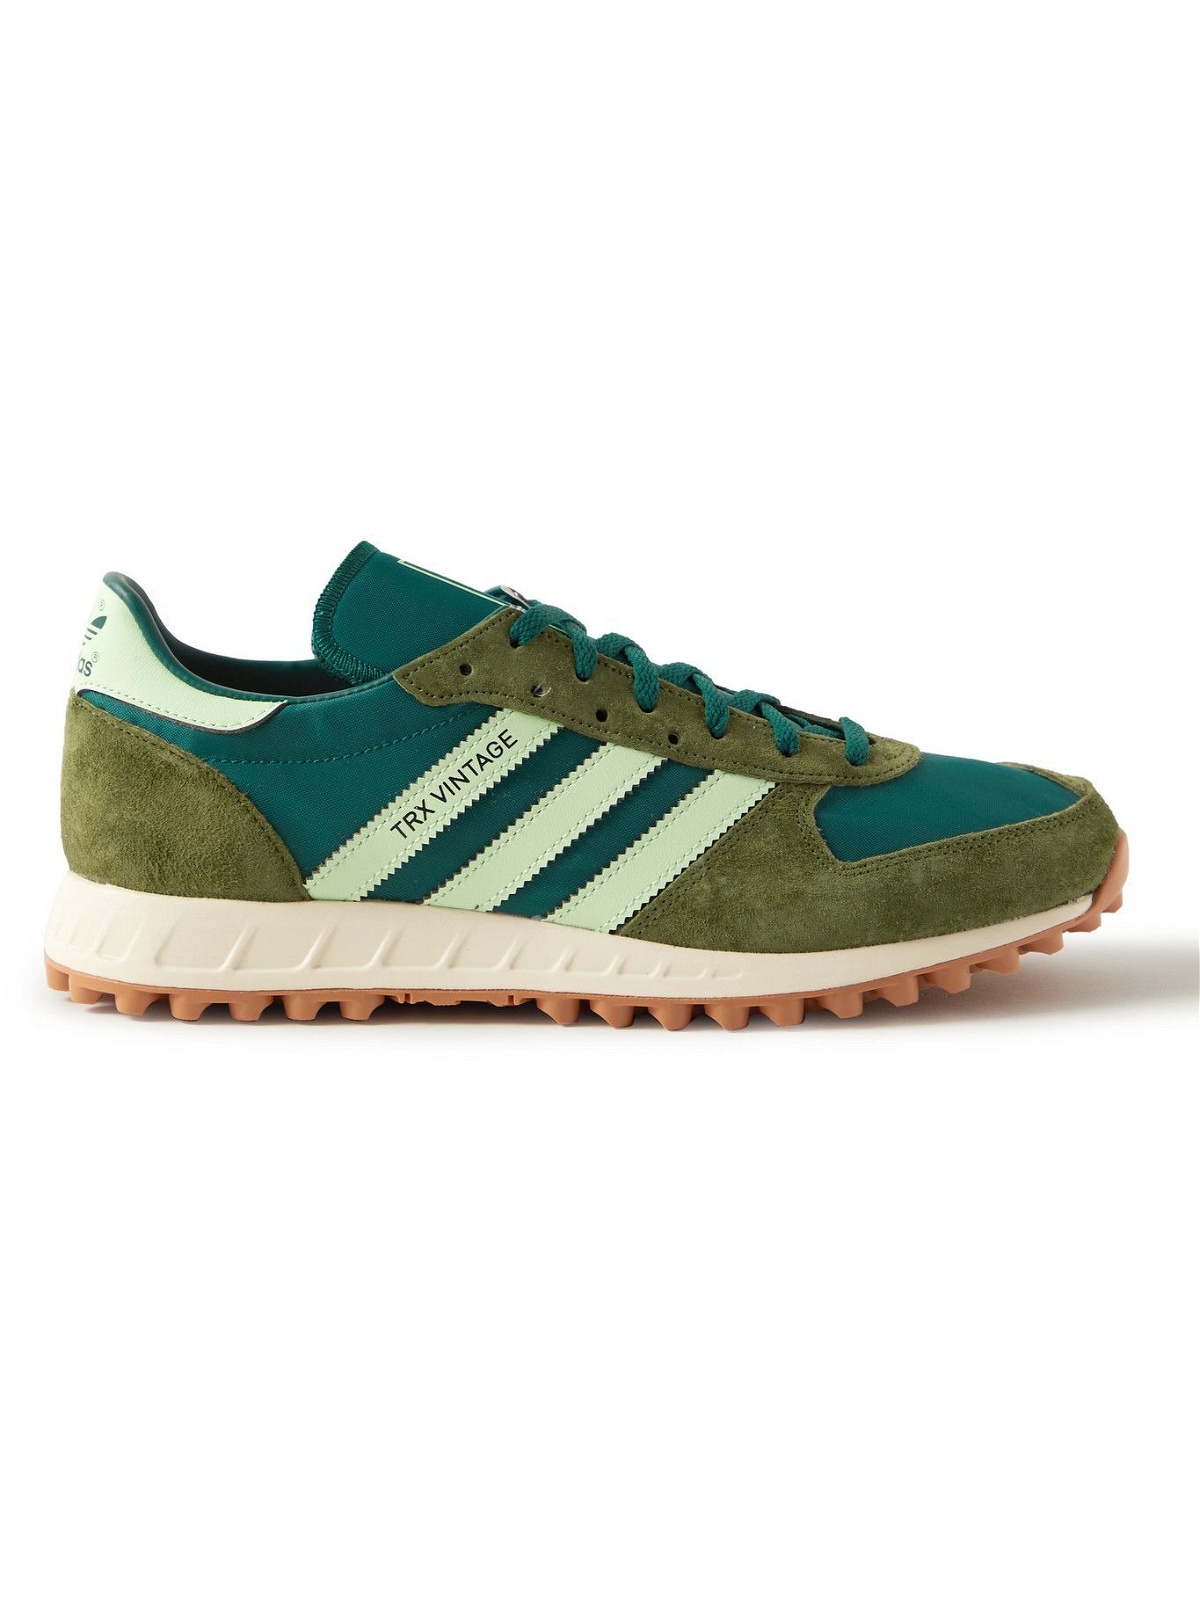 adidas green and white I-5923 mesh and suede leather sneakers | Adidas green,  Leather sneakers, Sneakers